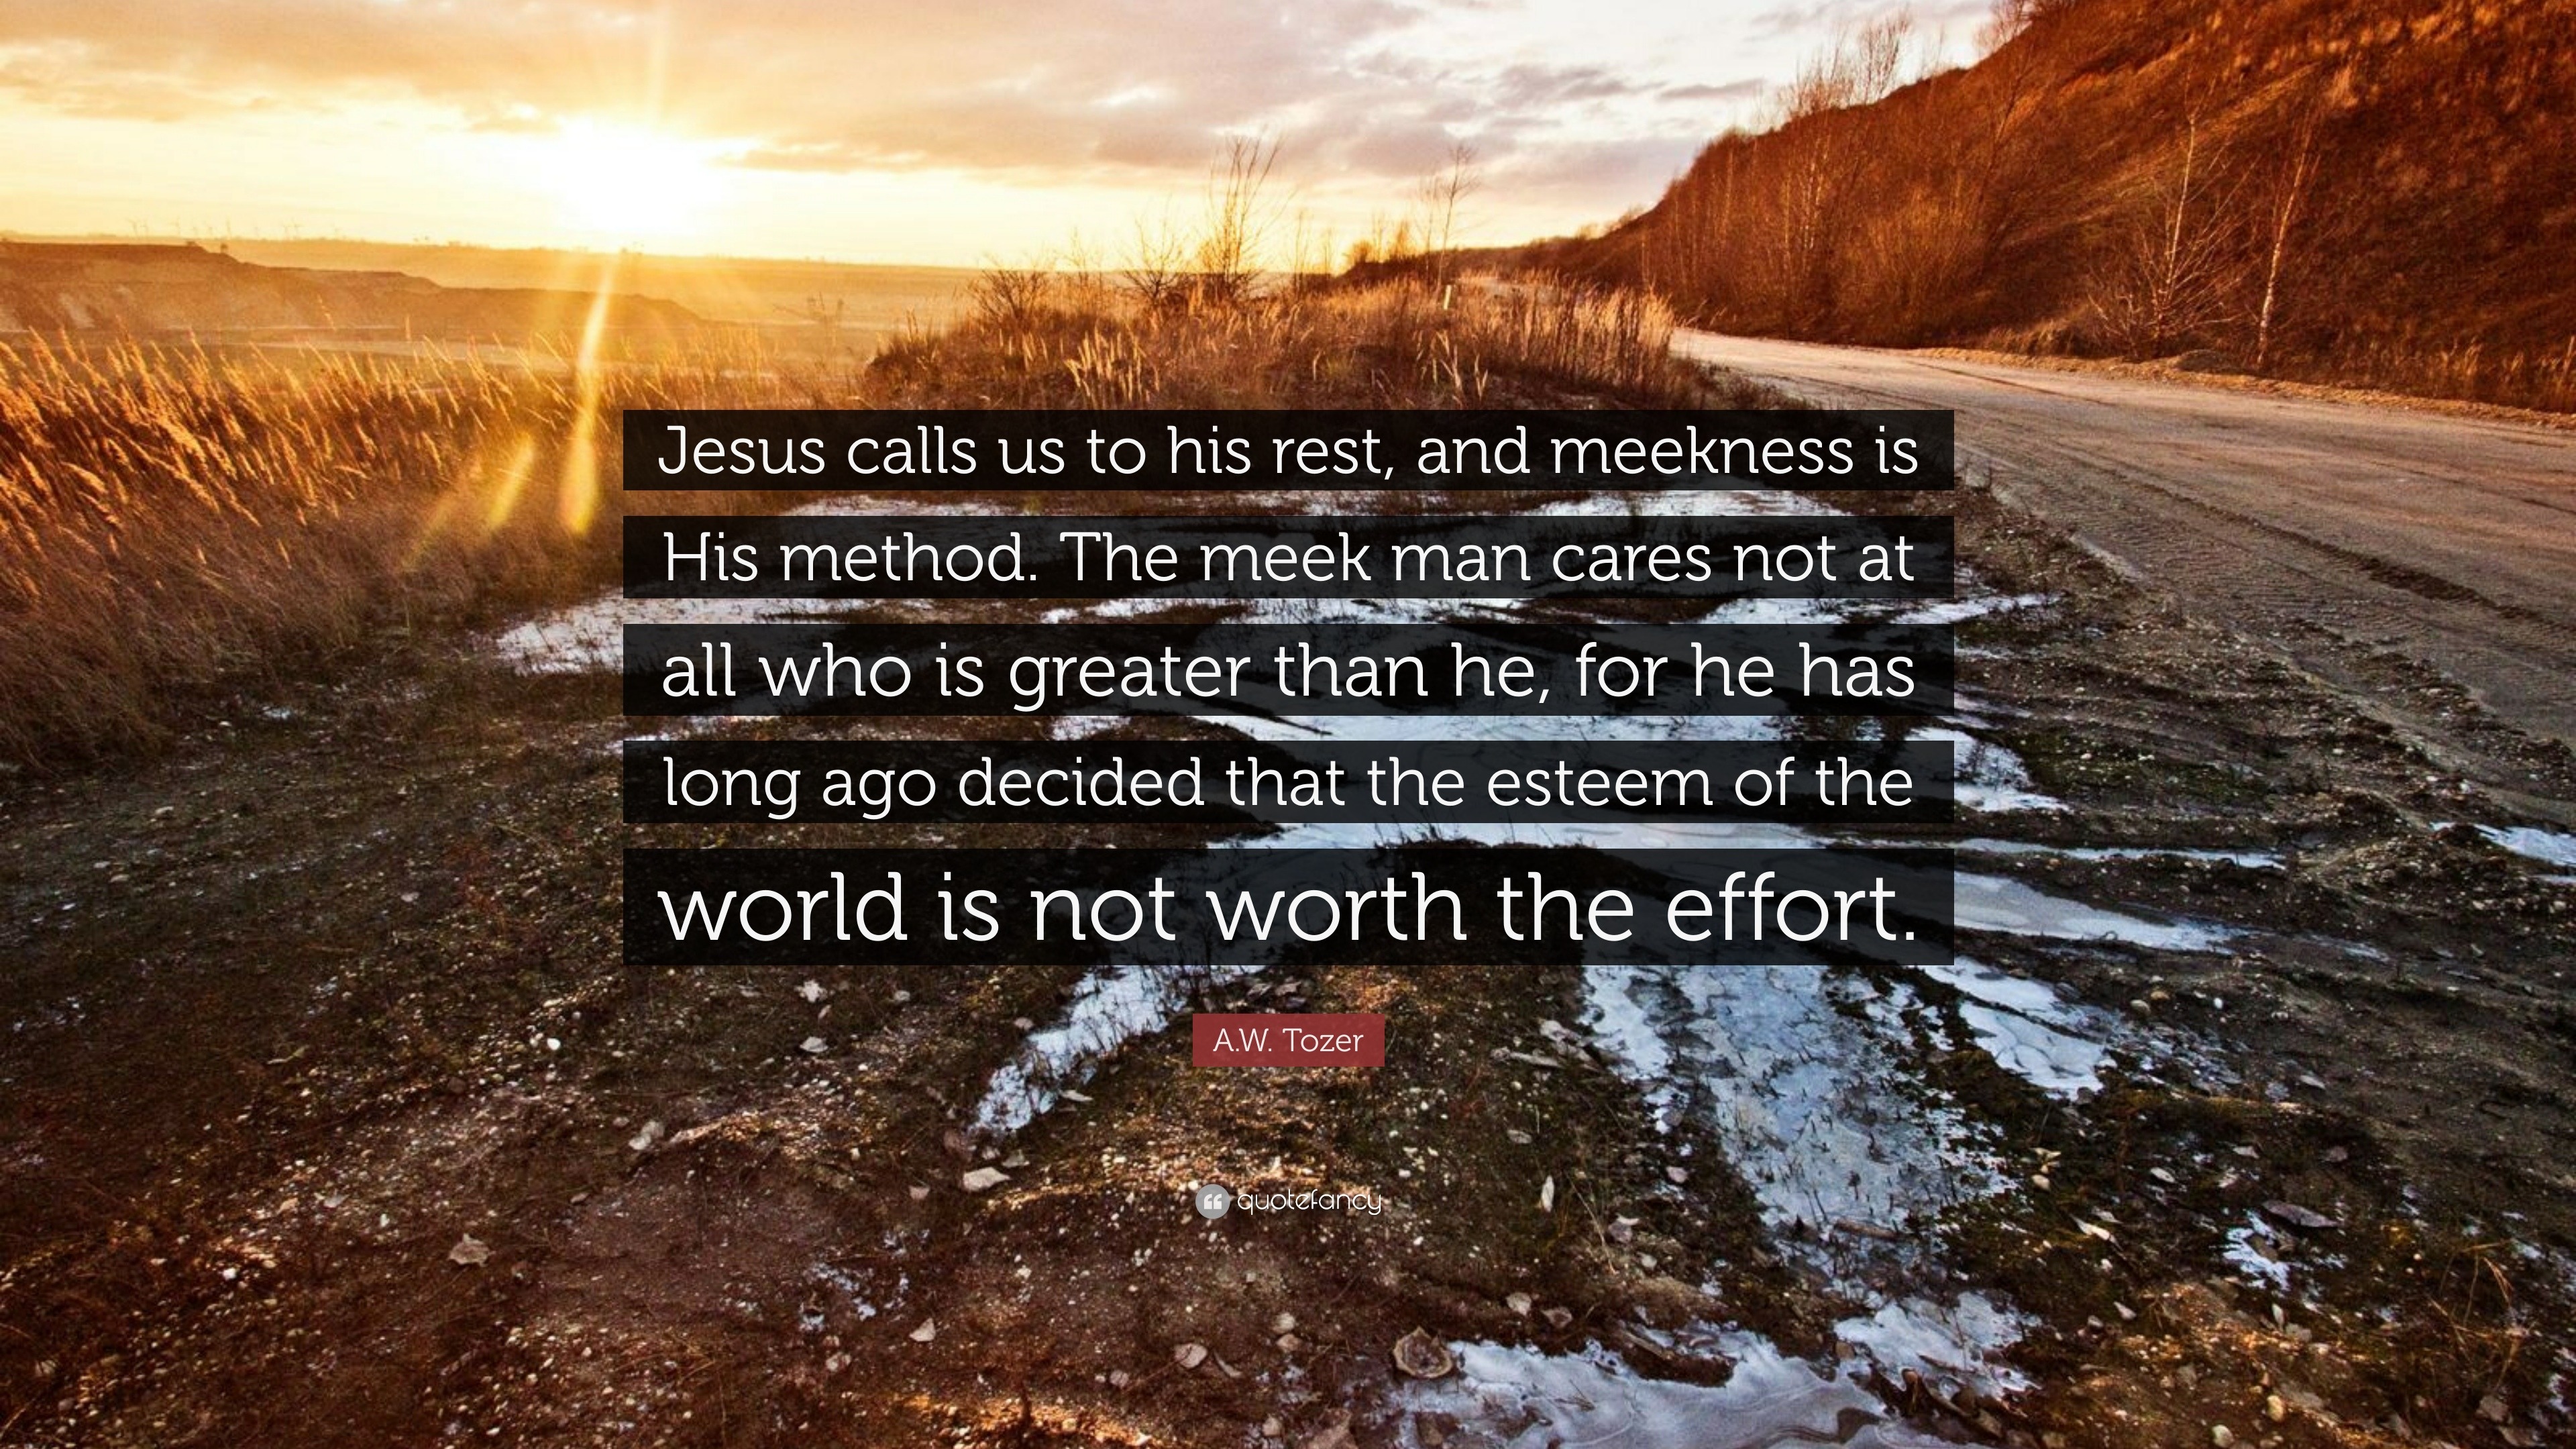 376806-A-W-Tozer-Quote-Jesus-calls-us-to-his-rest-and-meekness-is-His.jpg